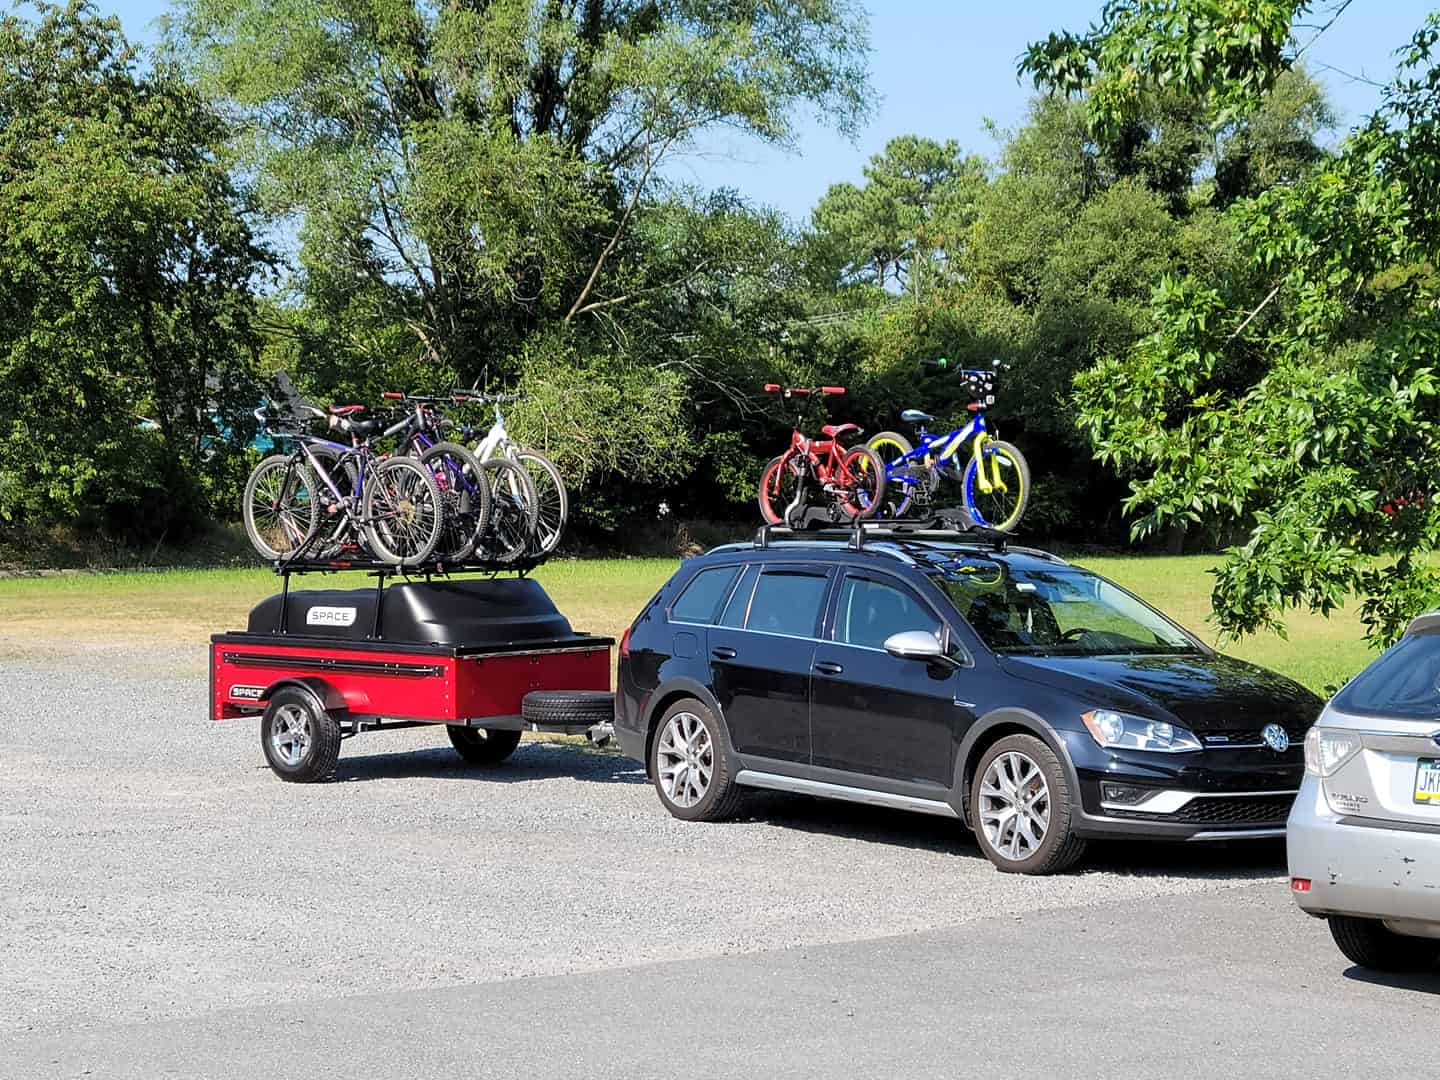 SUV and space trailer hauling bikes